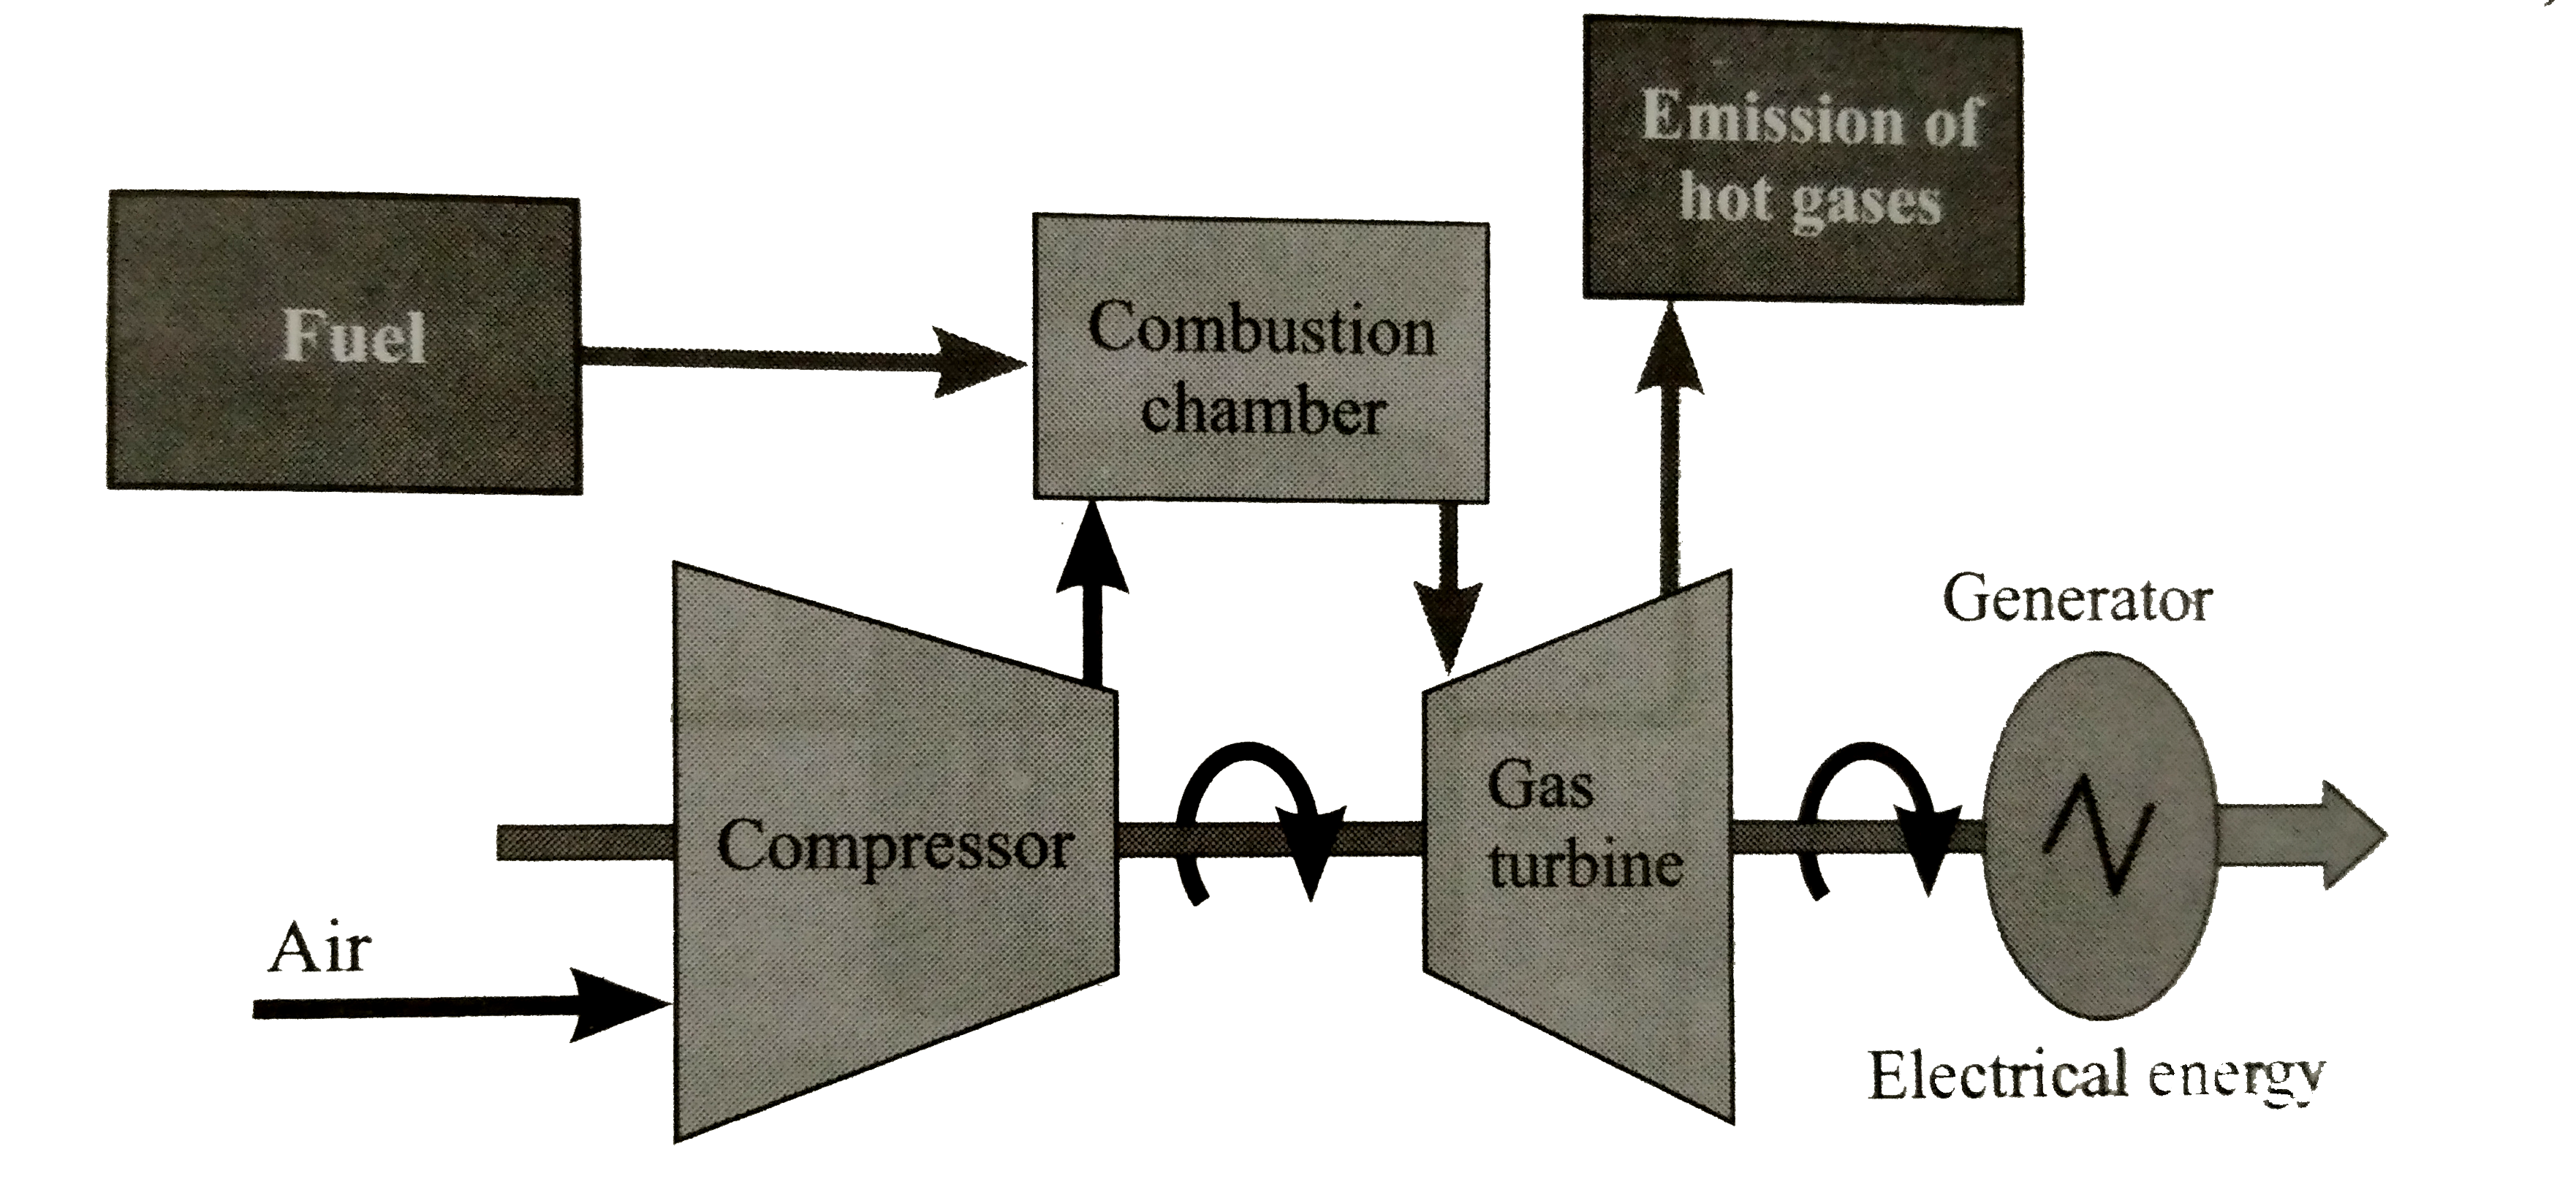 Observer the diagram and anser the questions .       (c) Which is more eco-friendly - Power generation from coal or Power generation from natural gas ? Why ?